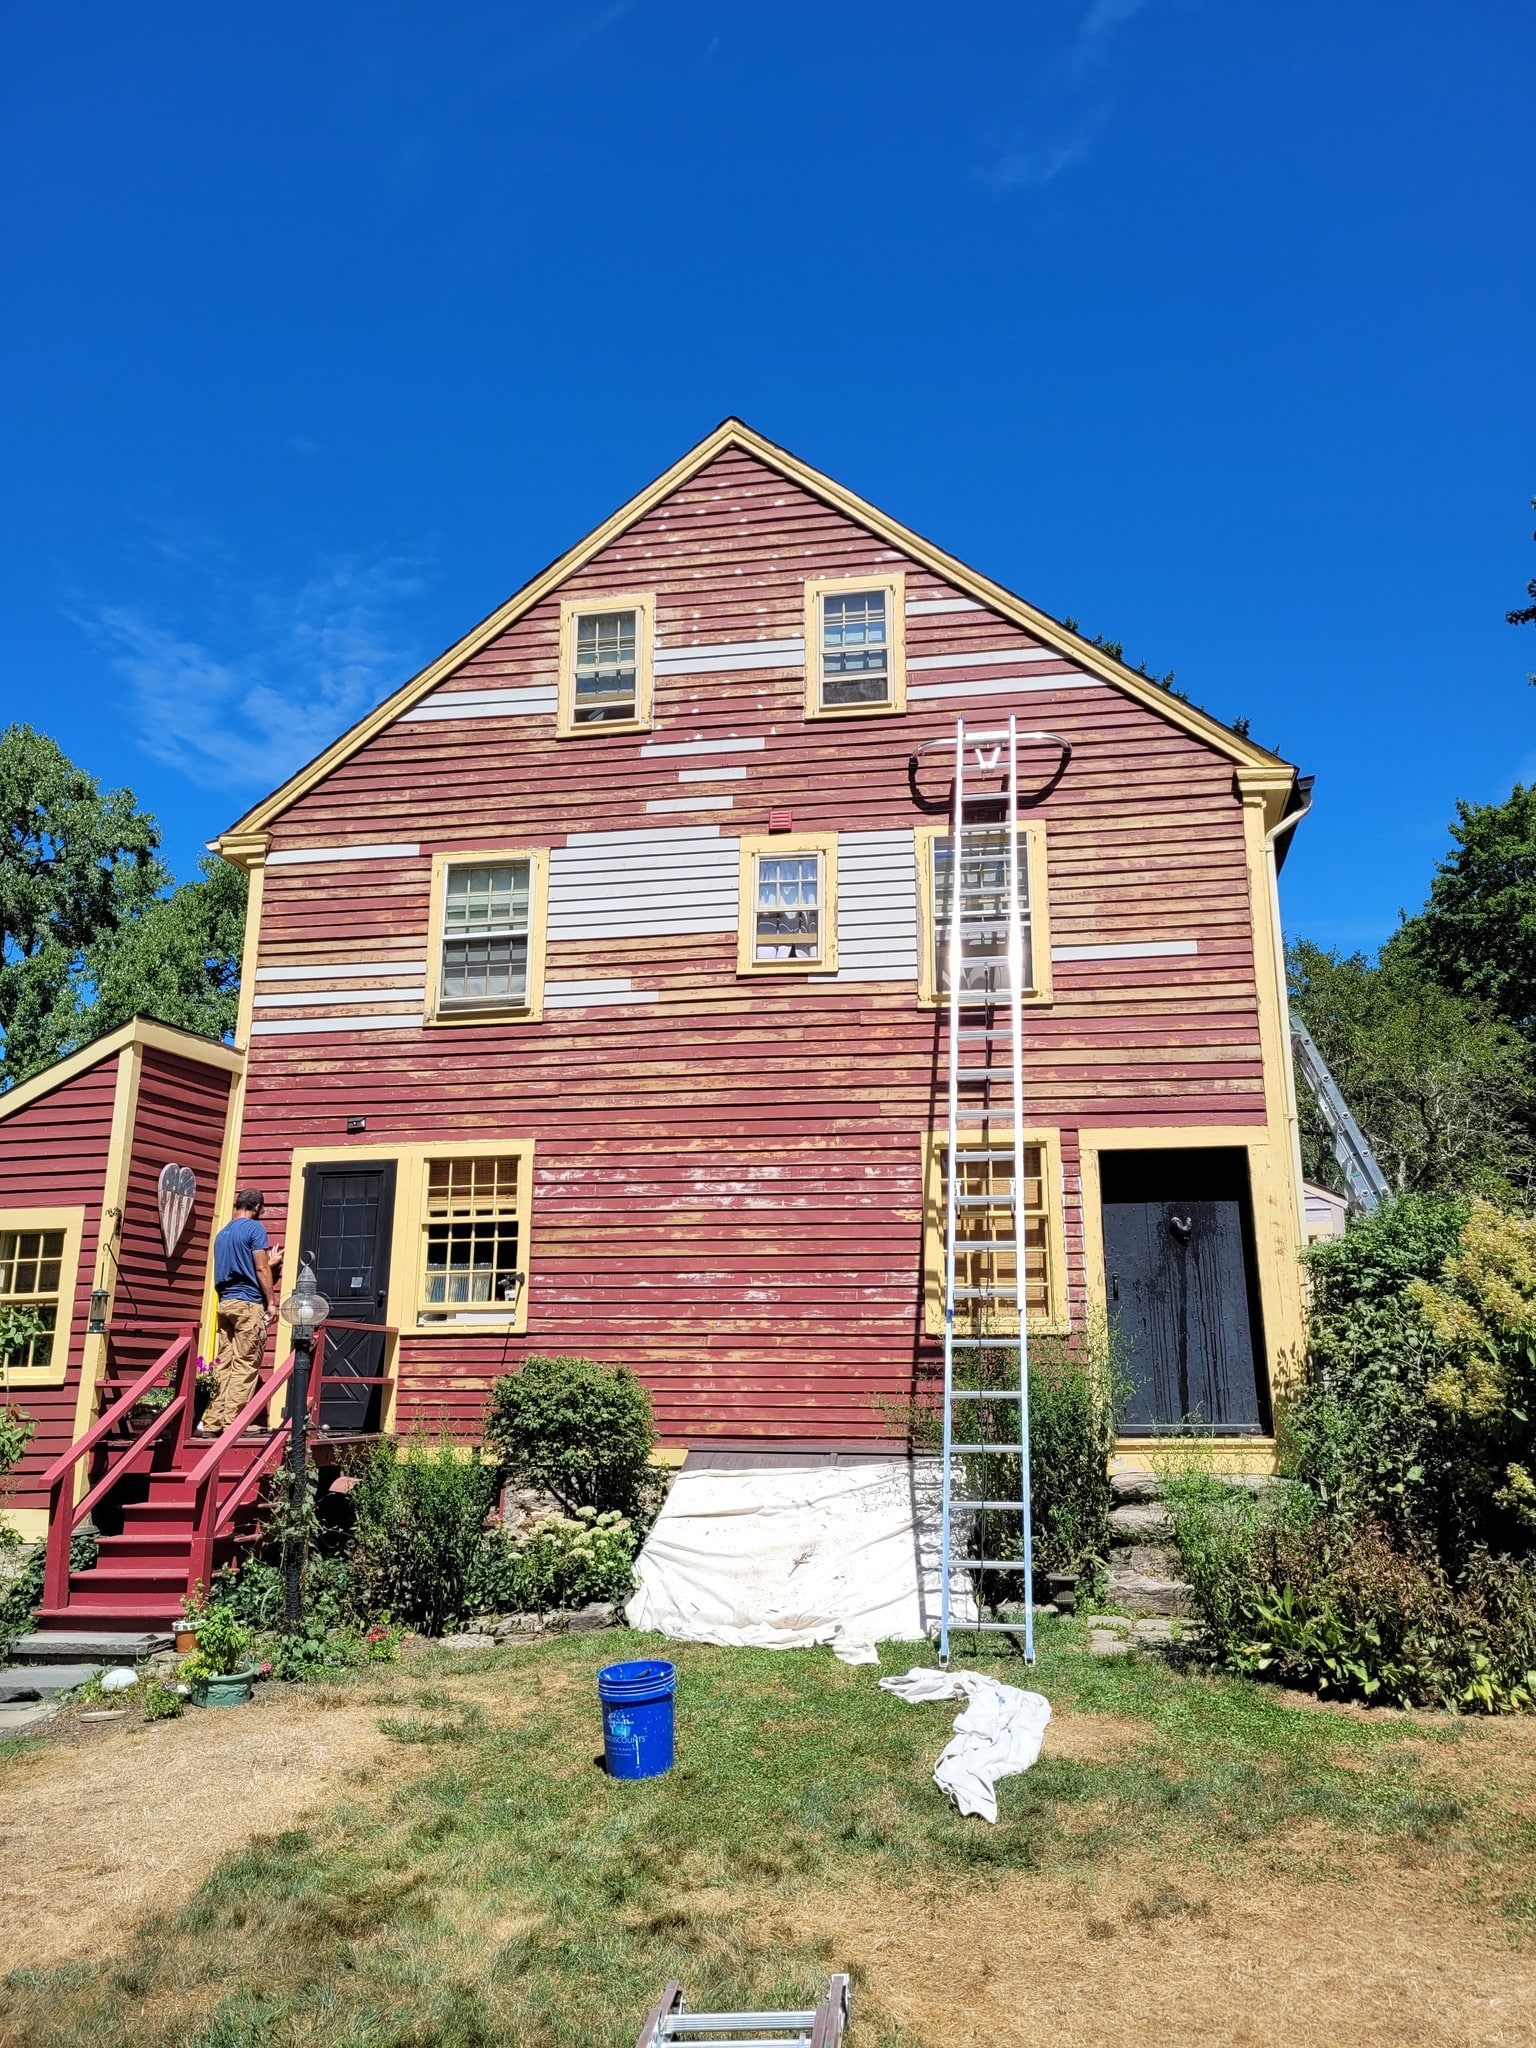 Home's exterior before paint restoration